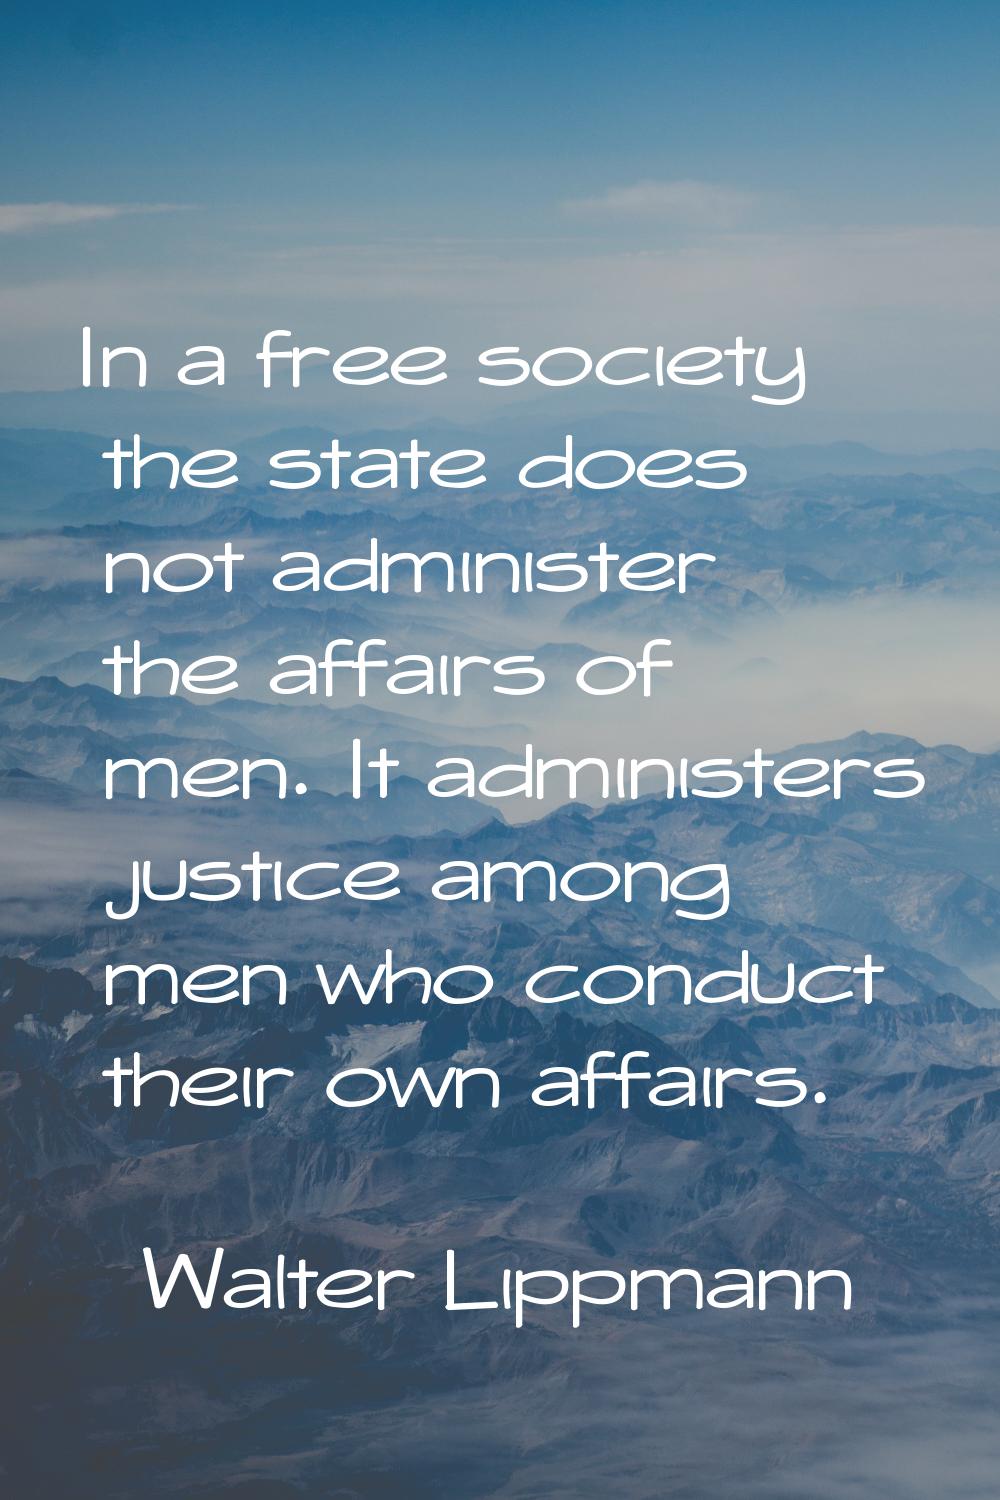 In a free society the state does not administer the affairs of men. It administers justice among me